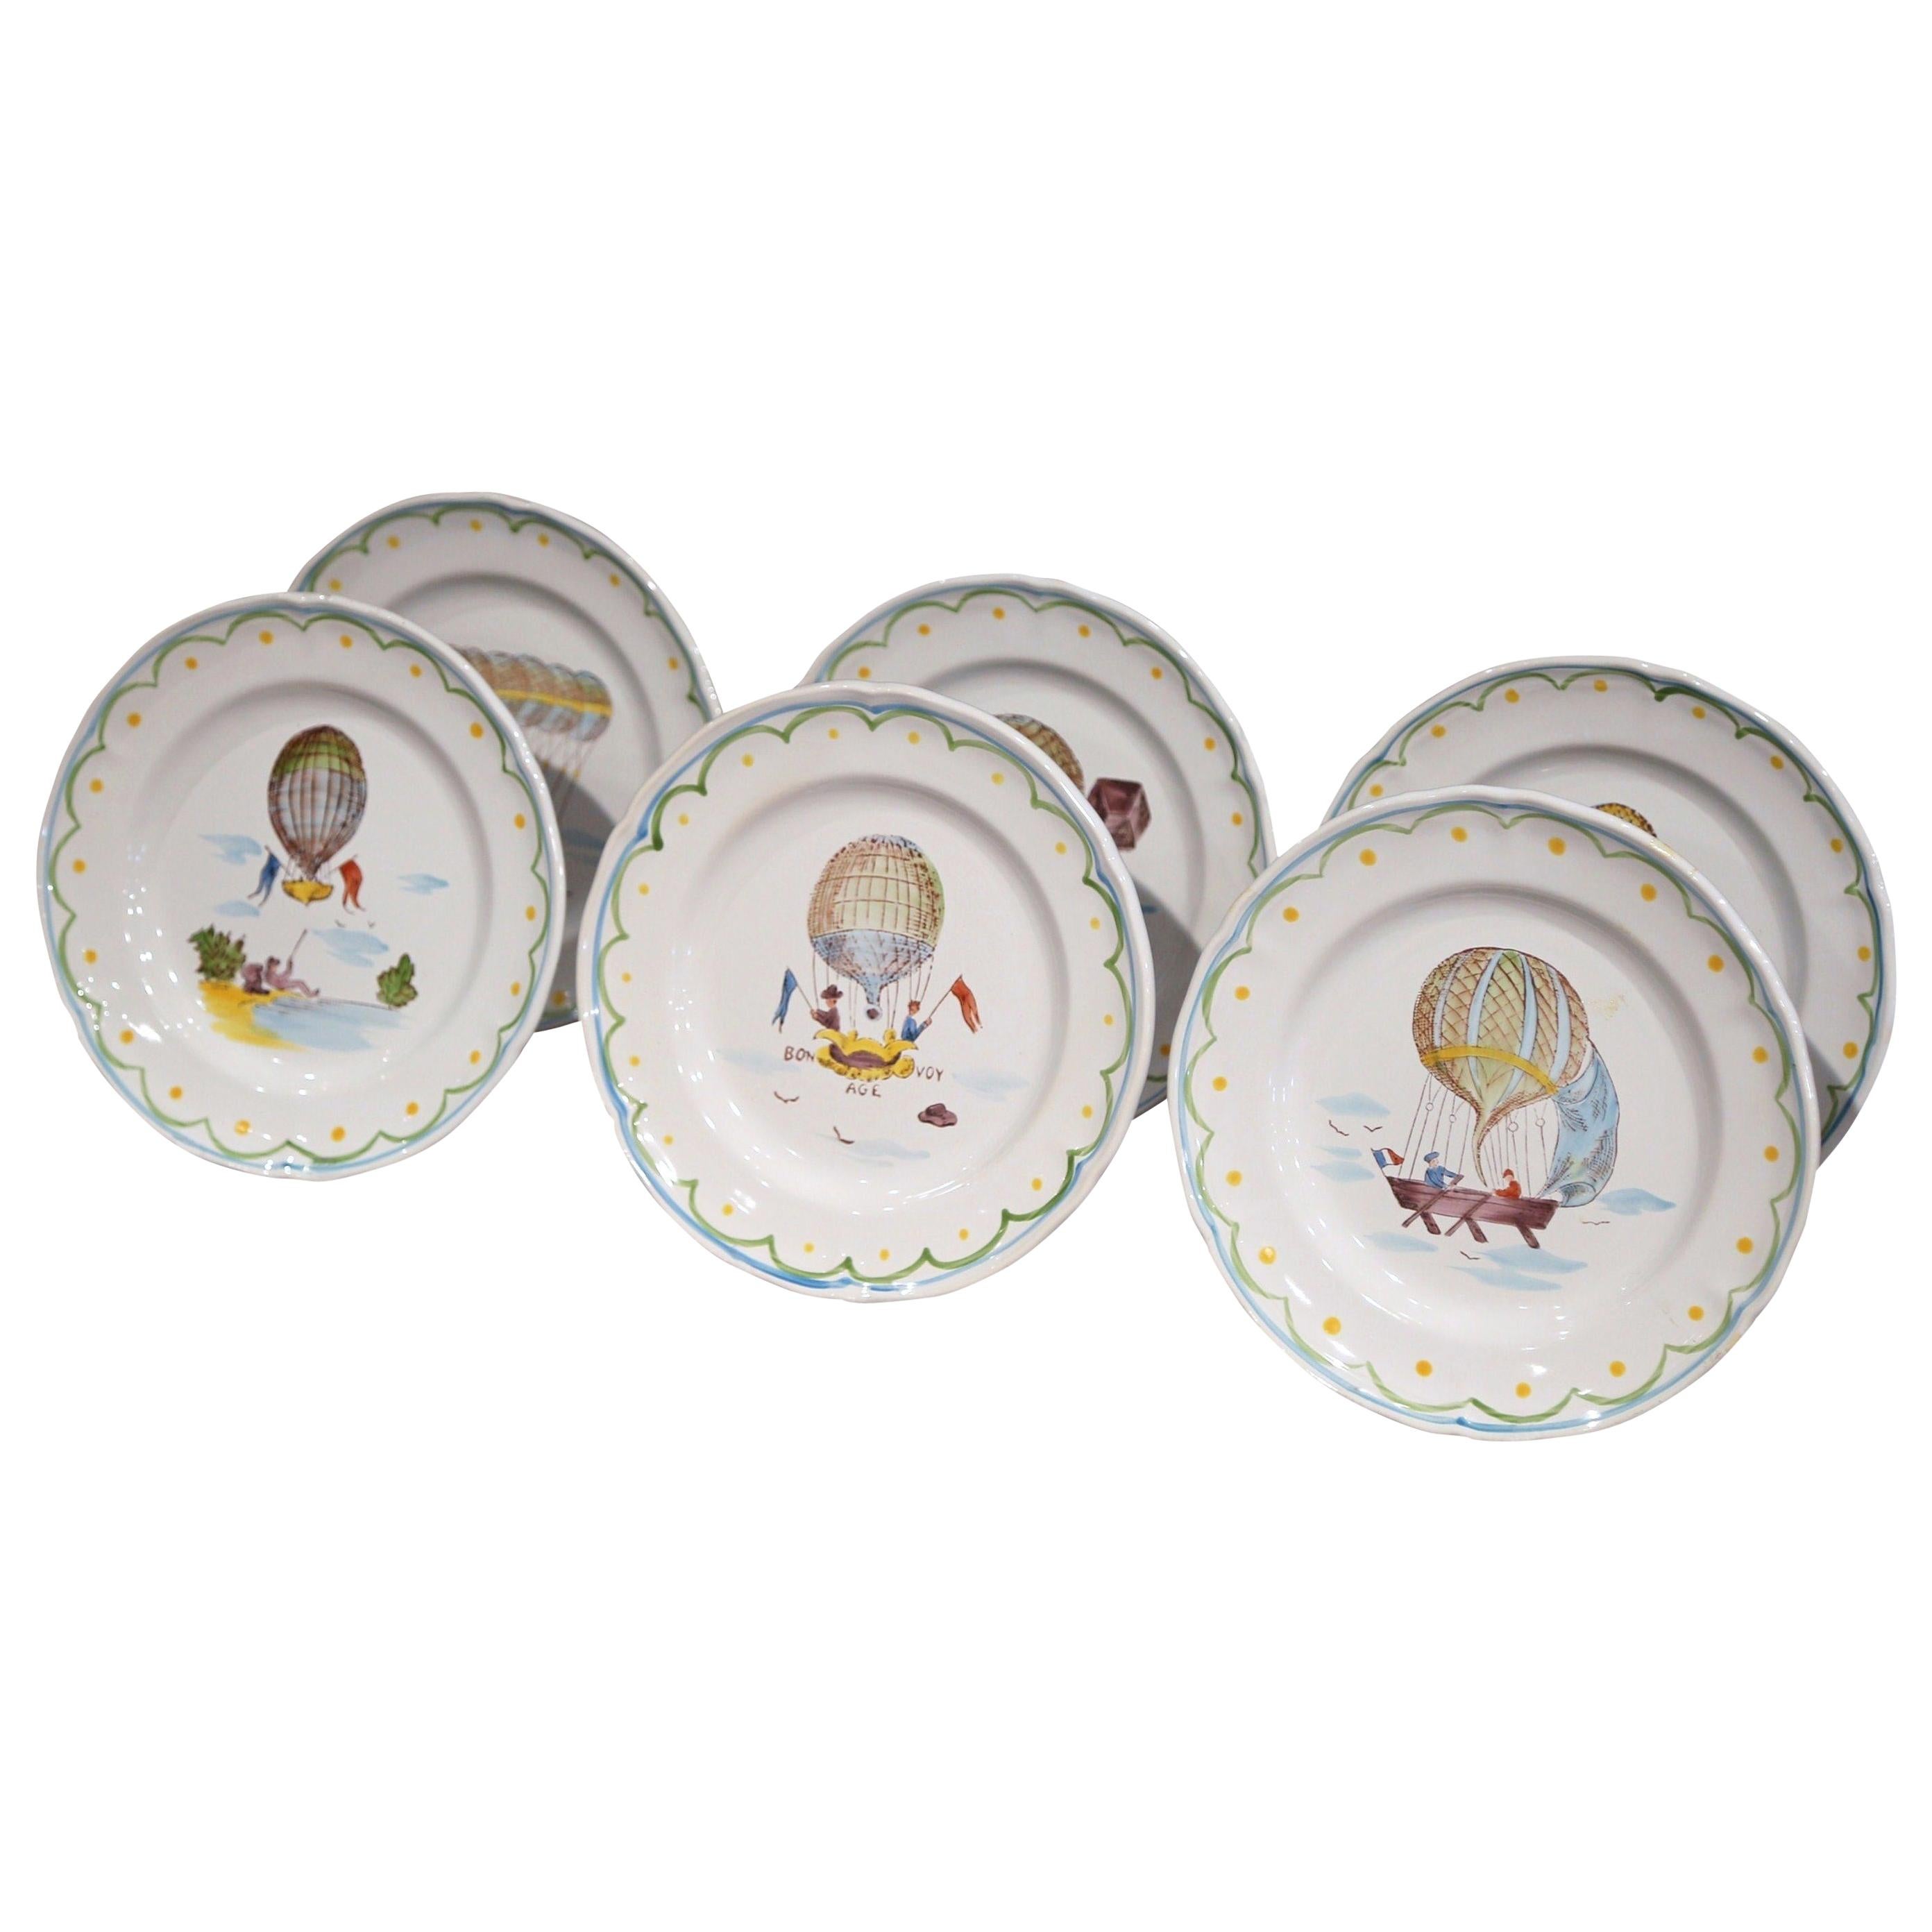 Set of Six French Hand Painted Ceramic Hot Air Balloon Plates from Brittany